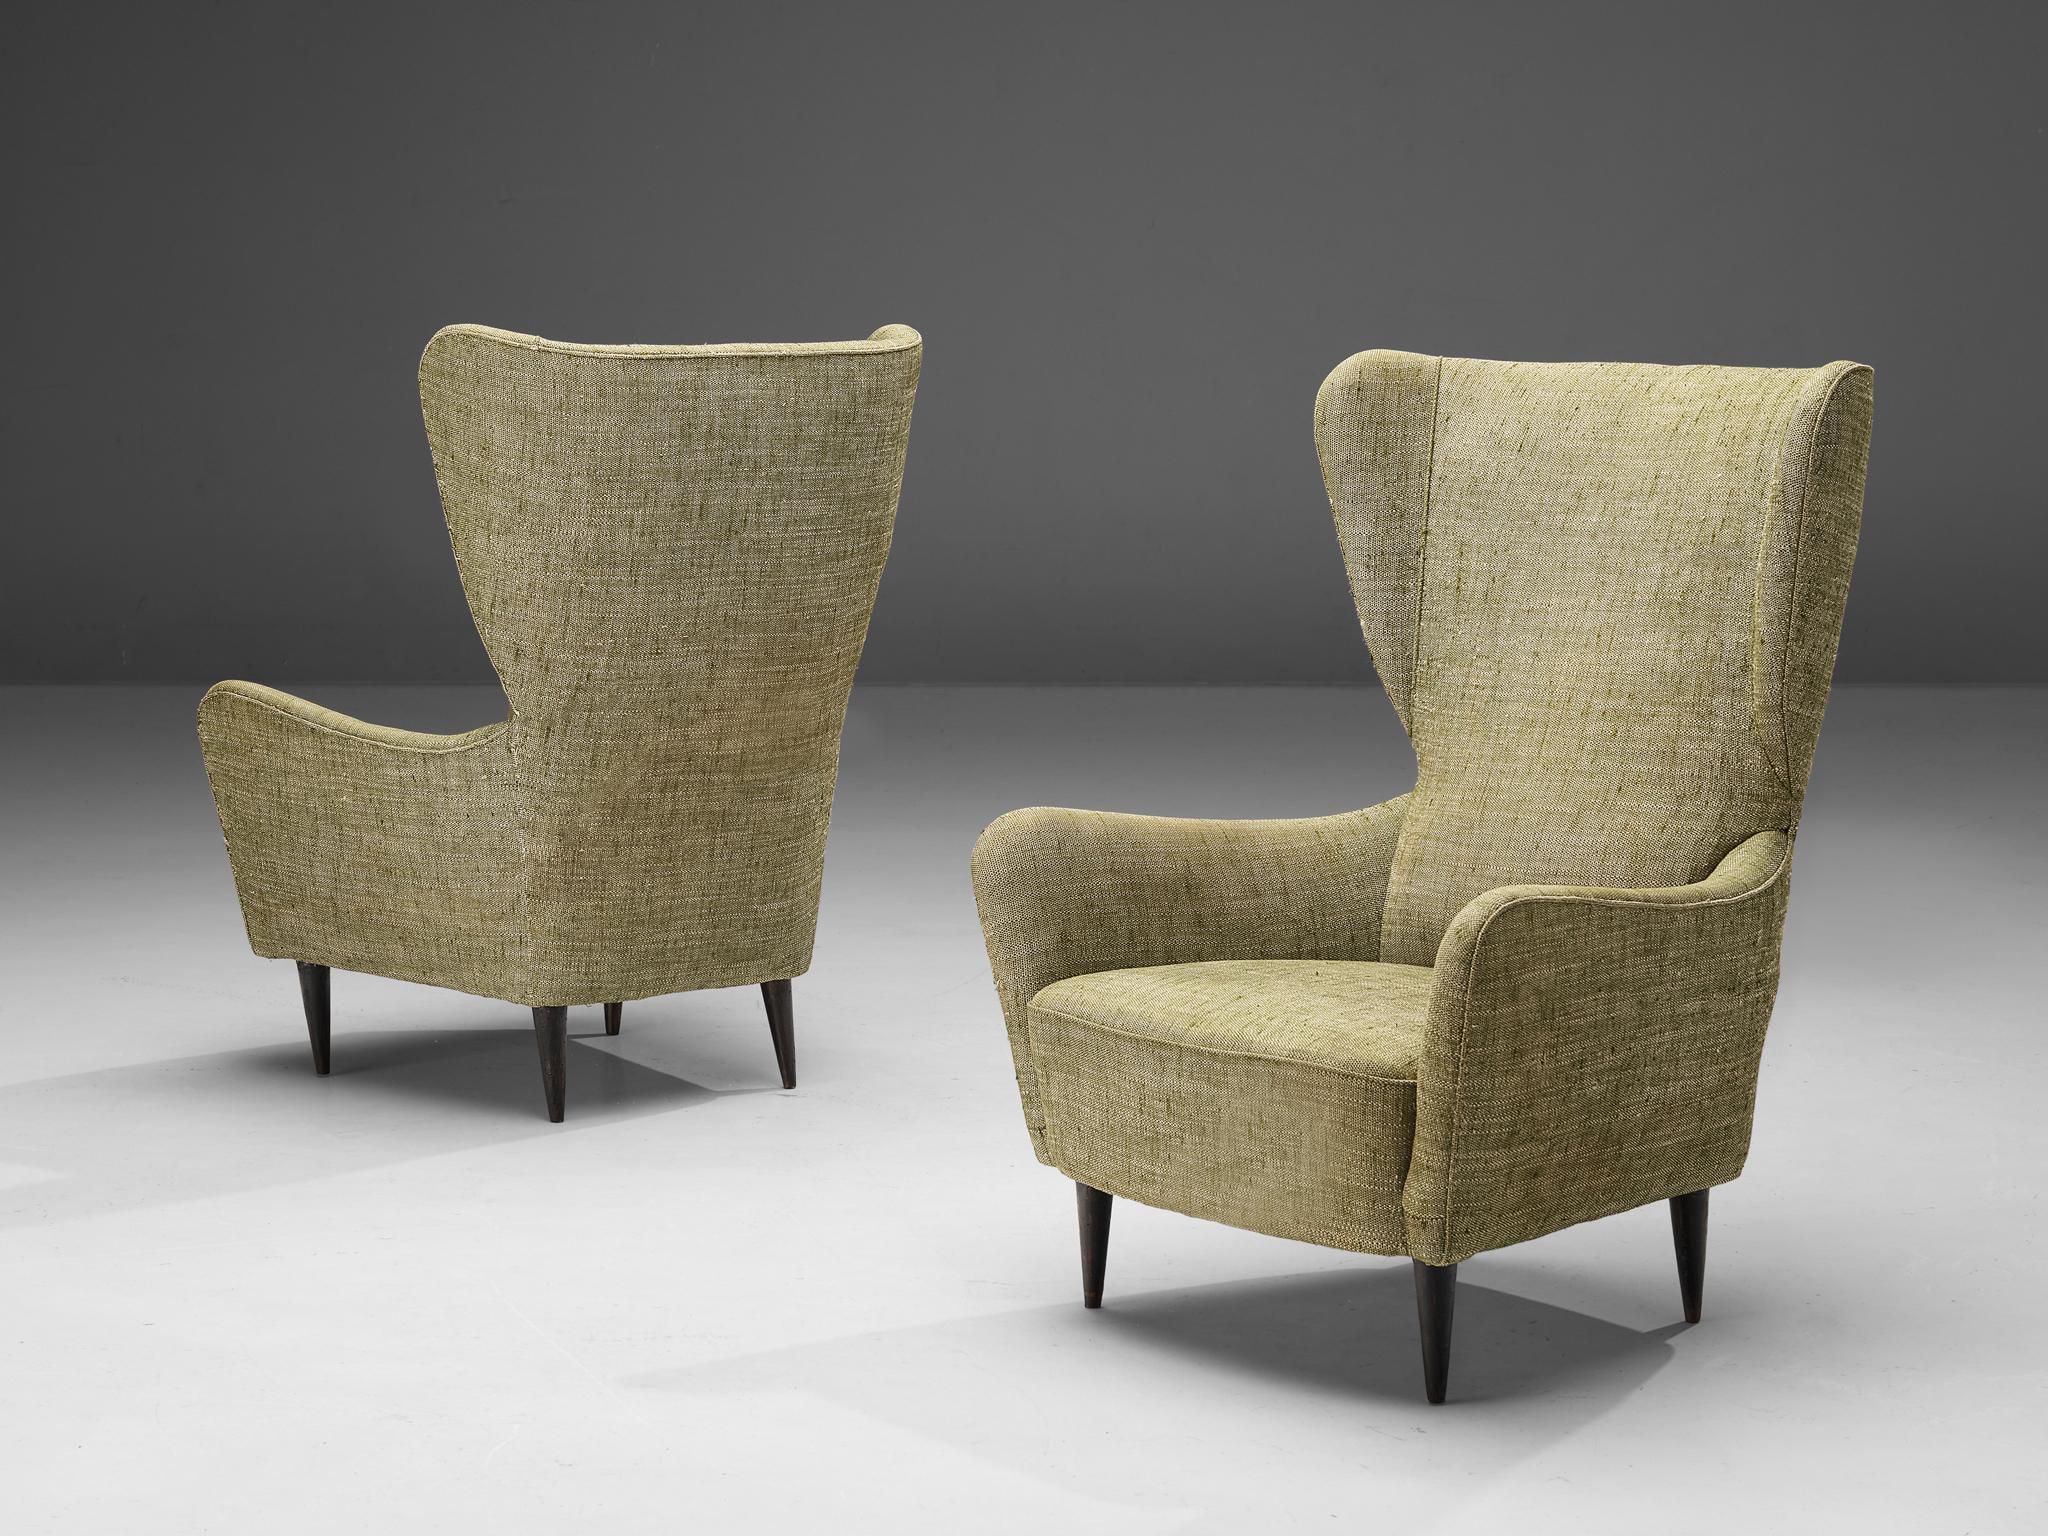 Pair of wingback chairs, fabric, wood, Italy, 1950s

Pair of elegant Italian olive green wingback lounge chairs. Beautiful organic formed seating with solid wooden legs. The gentle rounded armrests and seating give this design an elegant character.